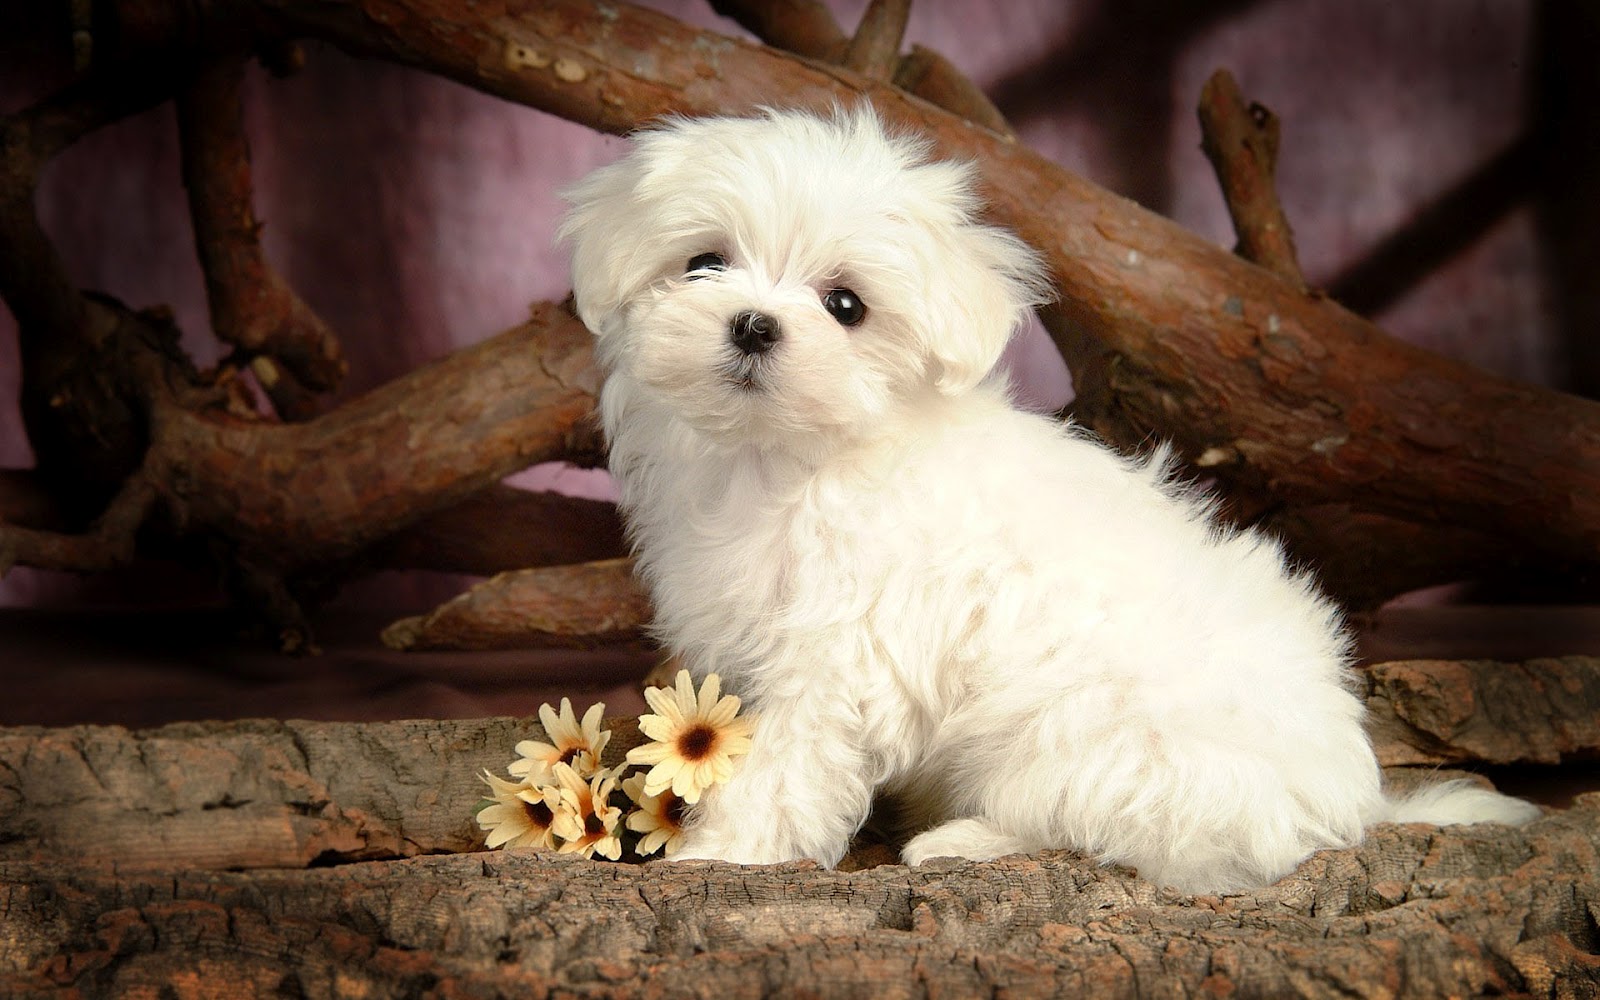 Download Cute Puppy Dog Wallpaper pictures in high definition or